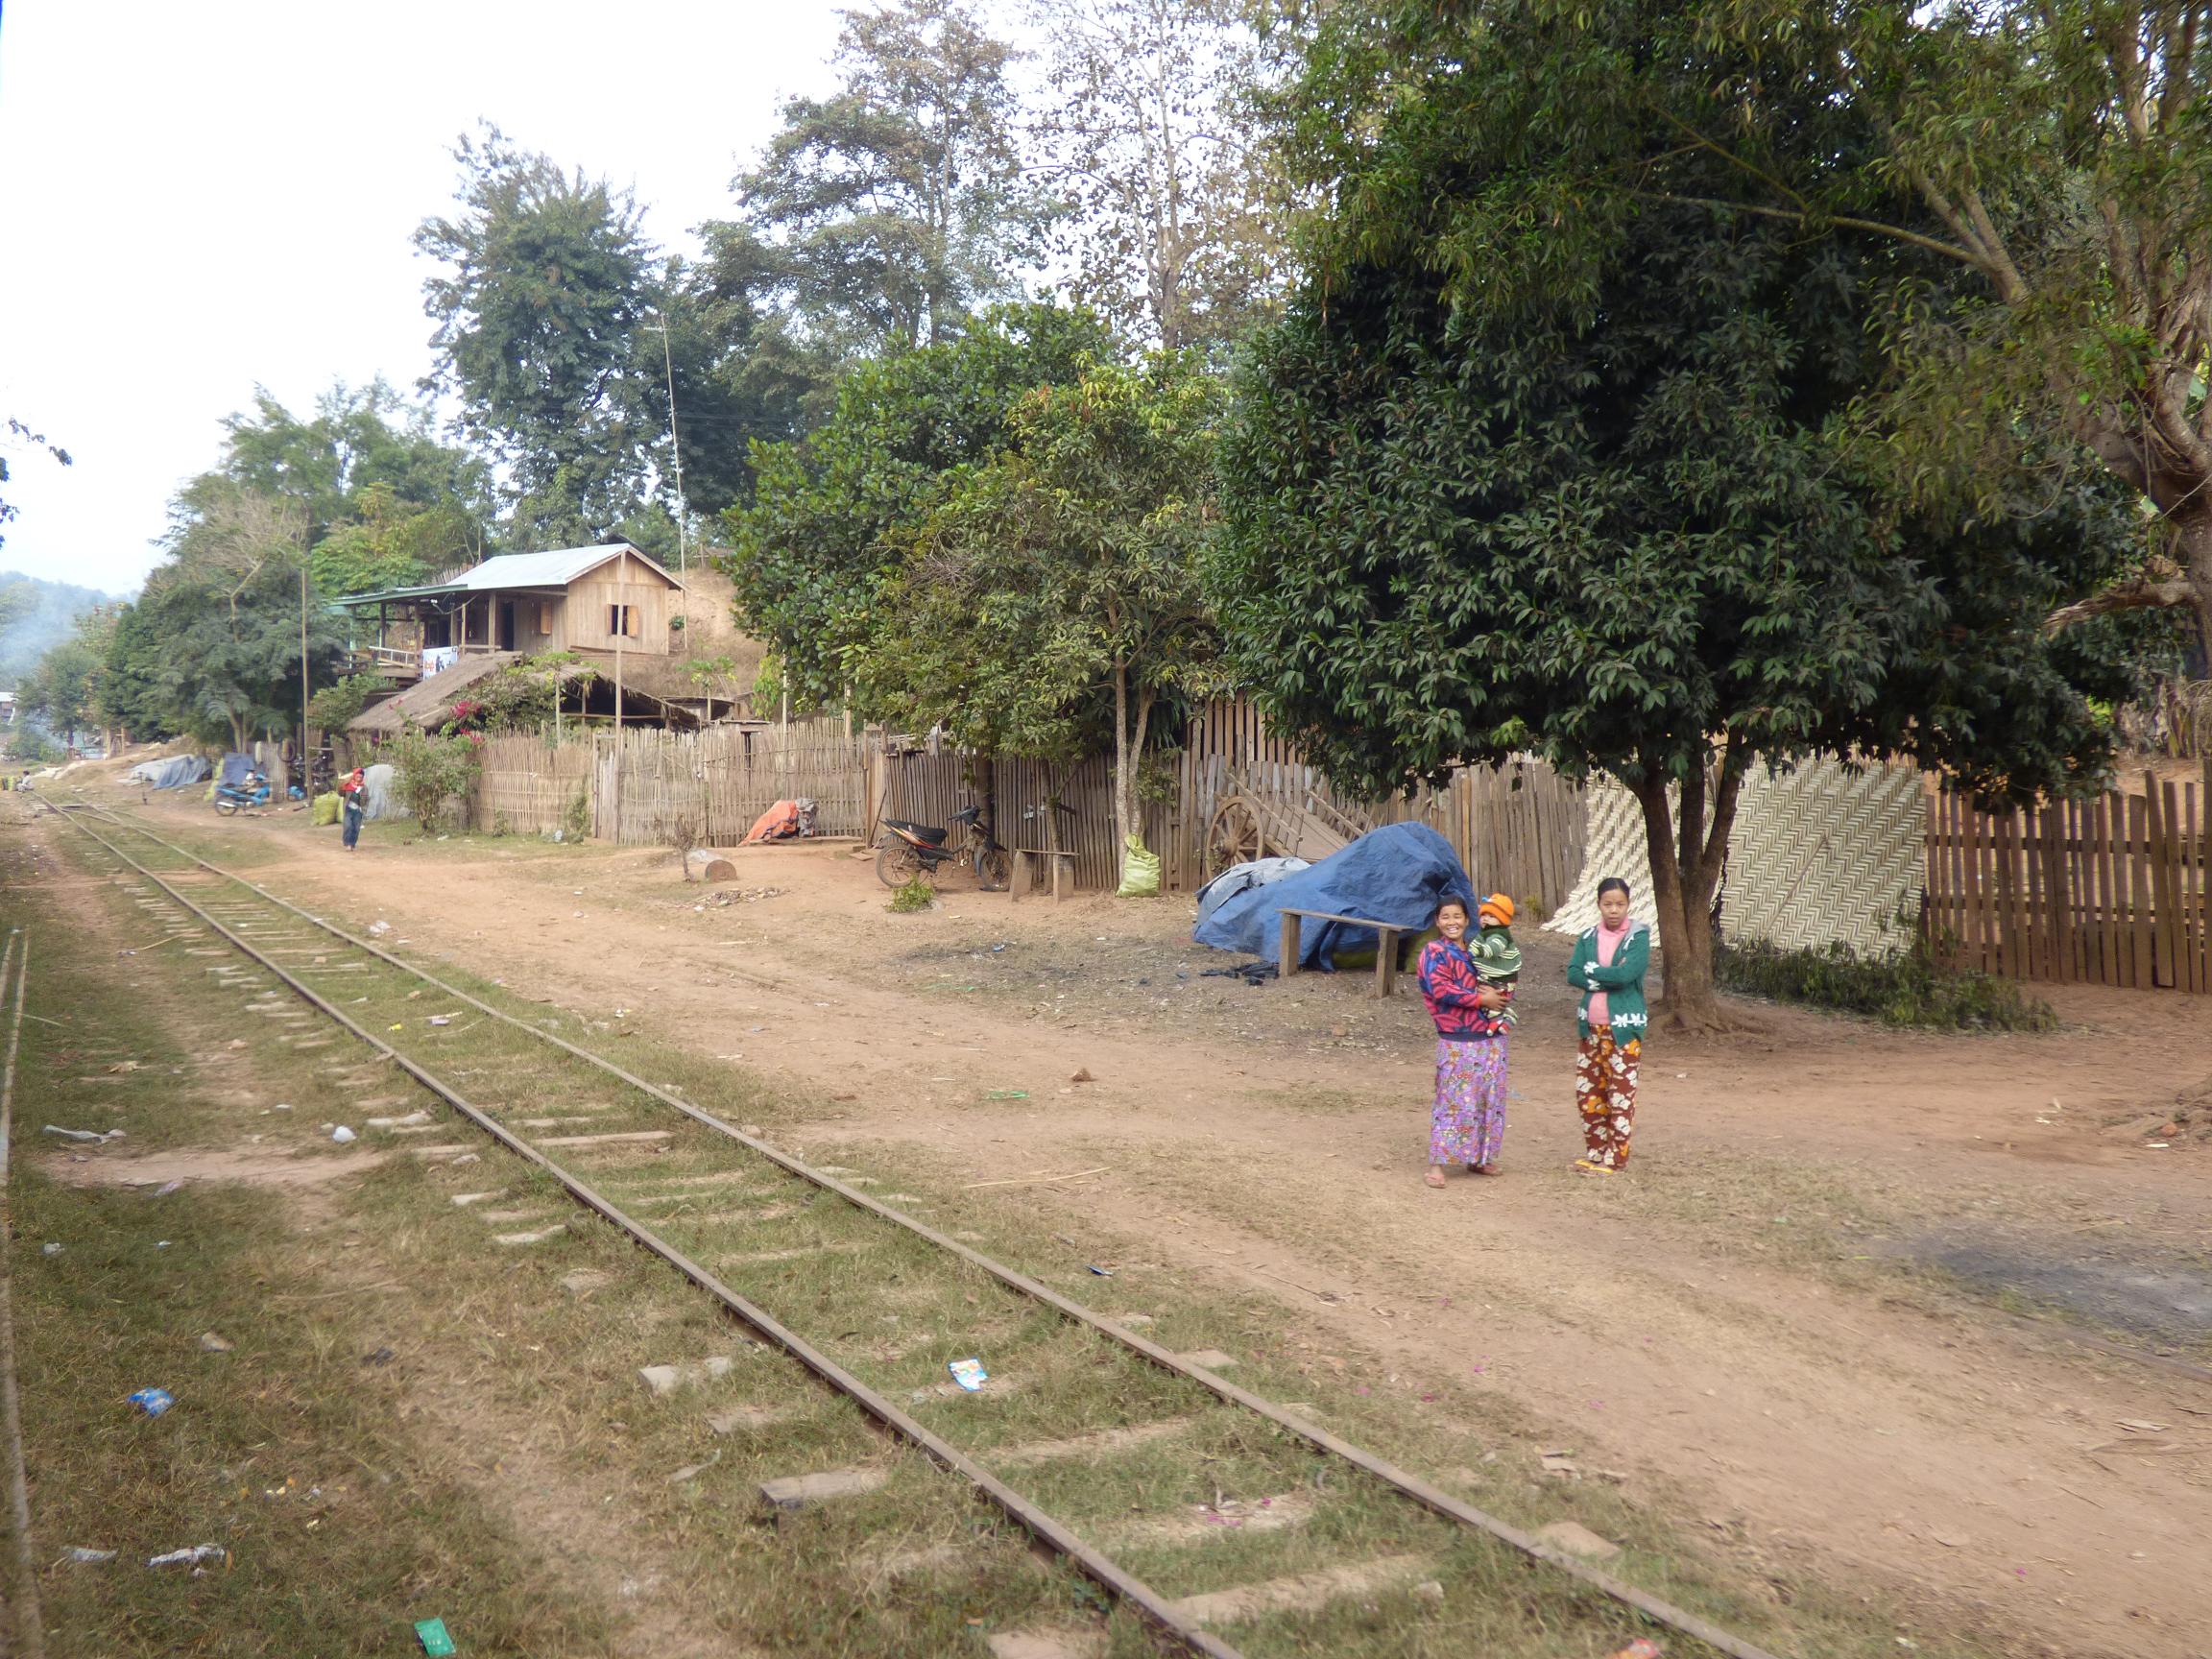 People at the villages in Shan Statee